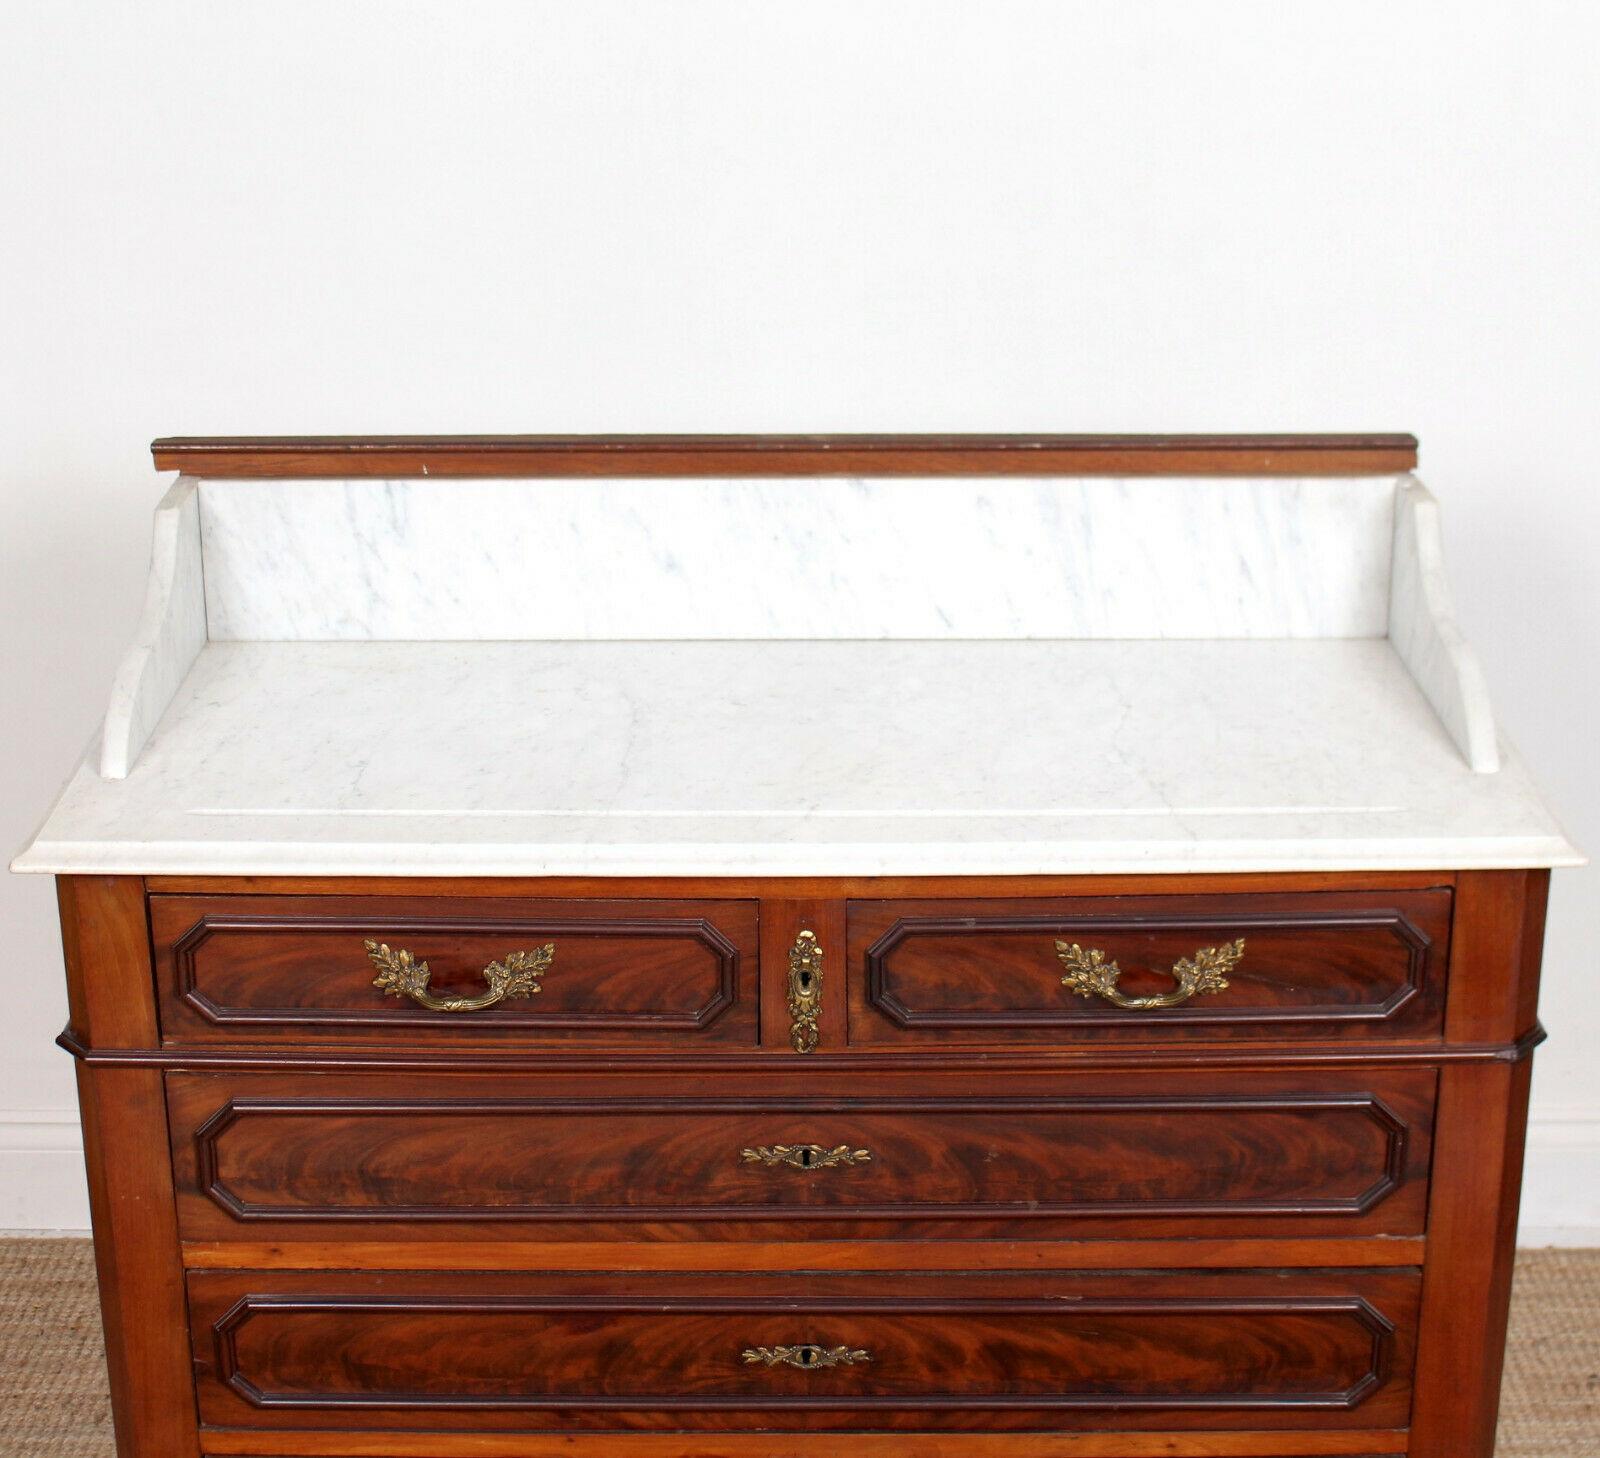 19th century French marble and Cuban mahogany washstand.

The marble top above an arrange of beadwork paneled short and long graduating drawers with oak lined interiors and dovetailed jointing.
Raised on a plinth base with canted corners and